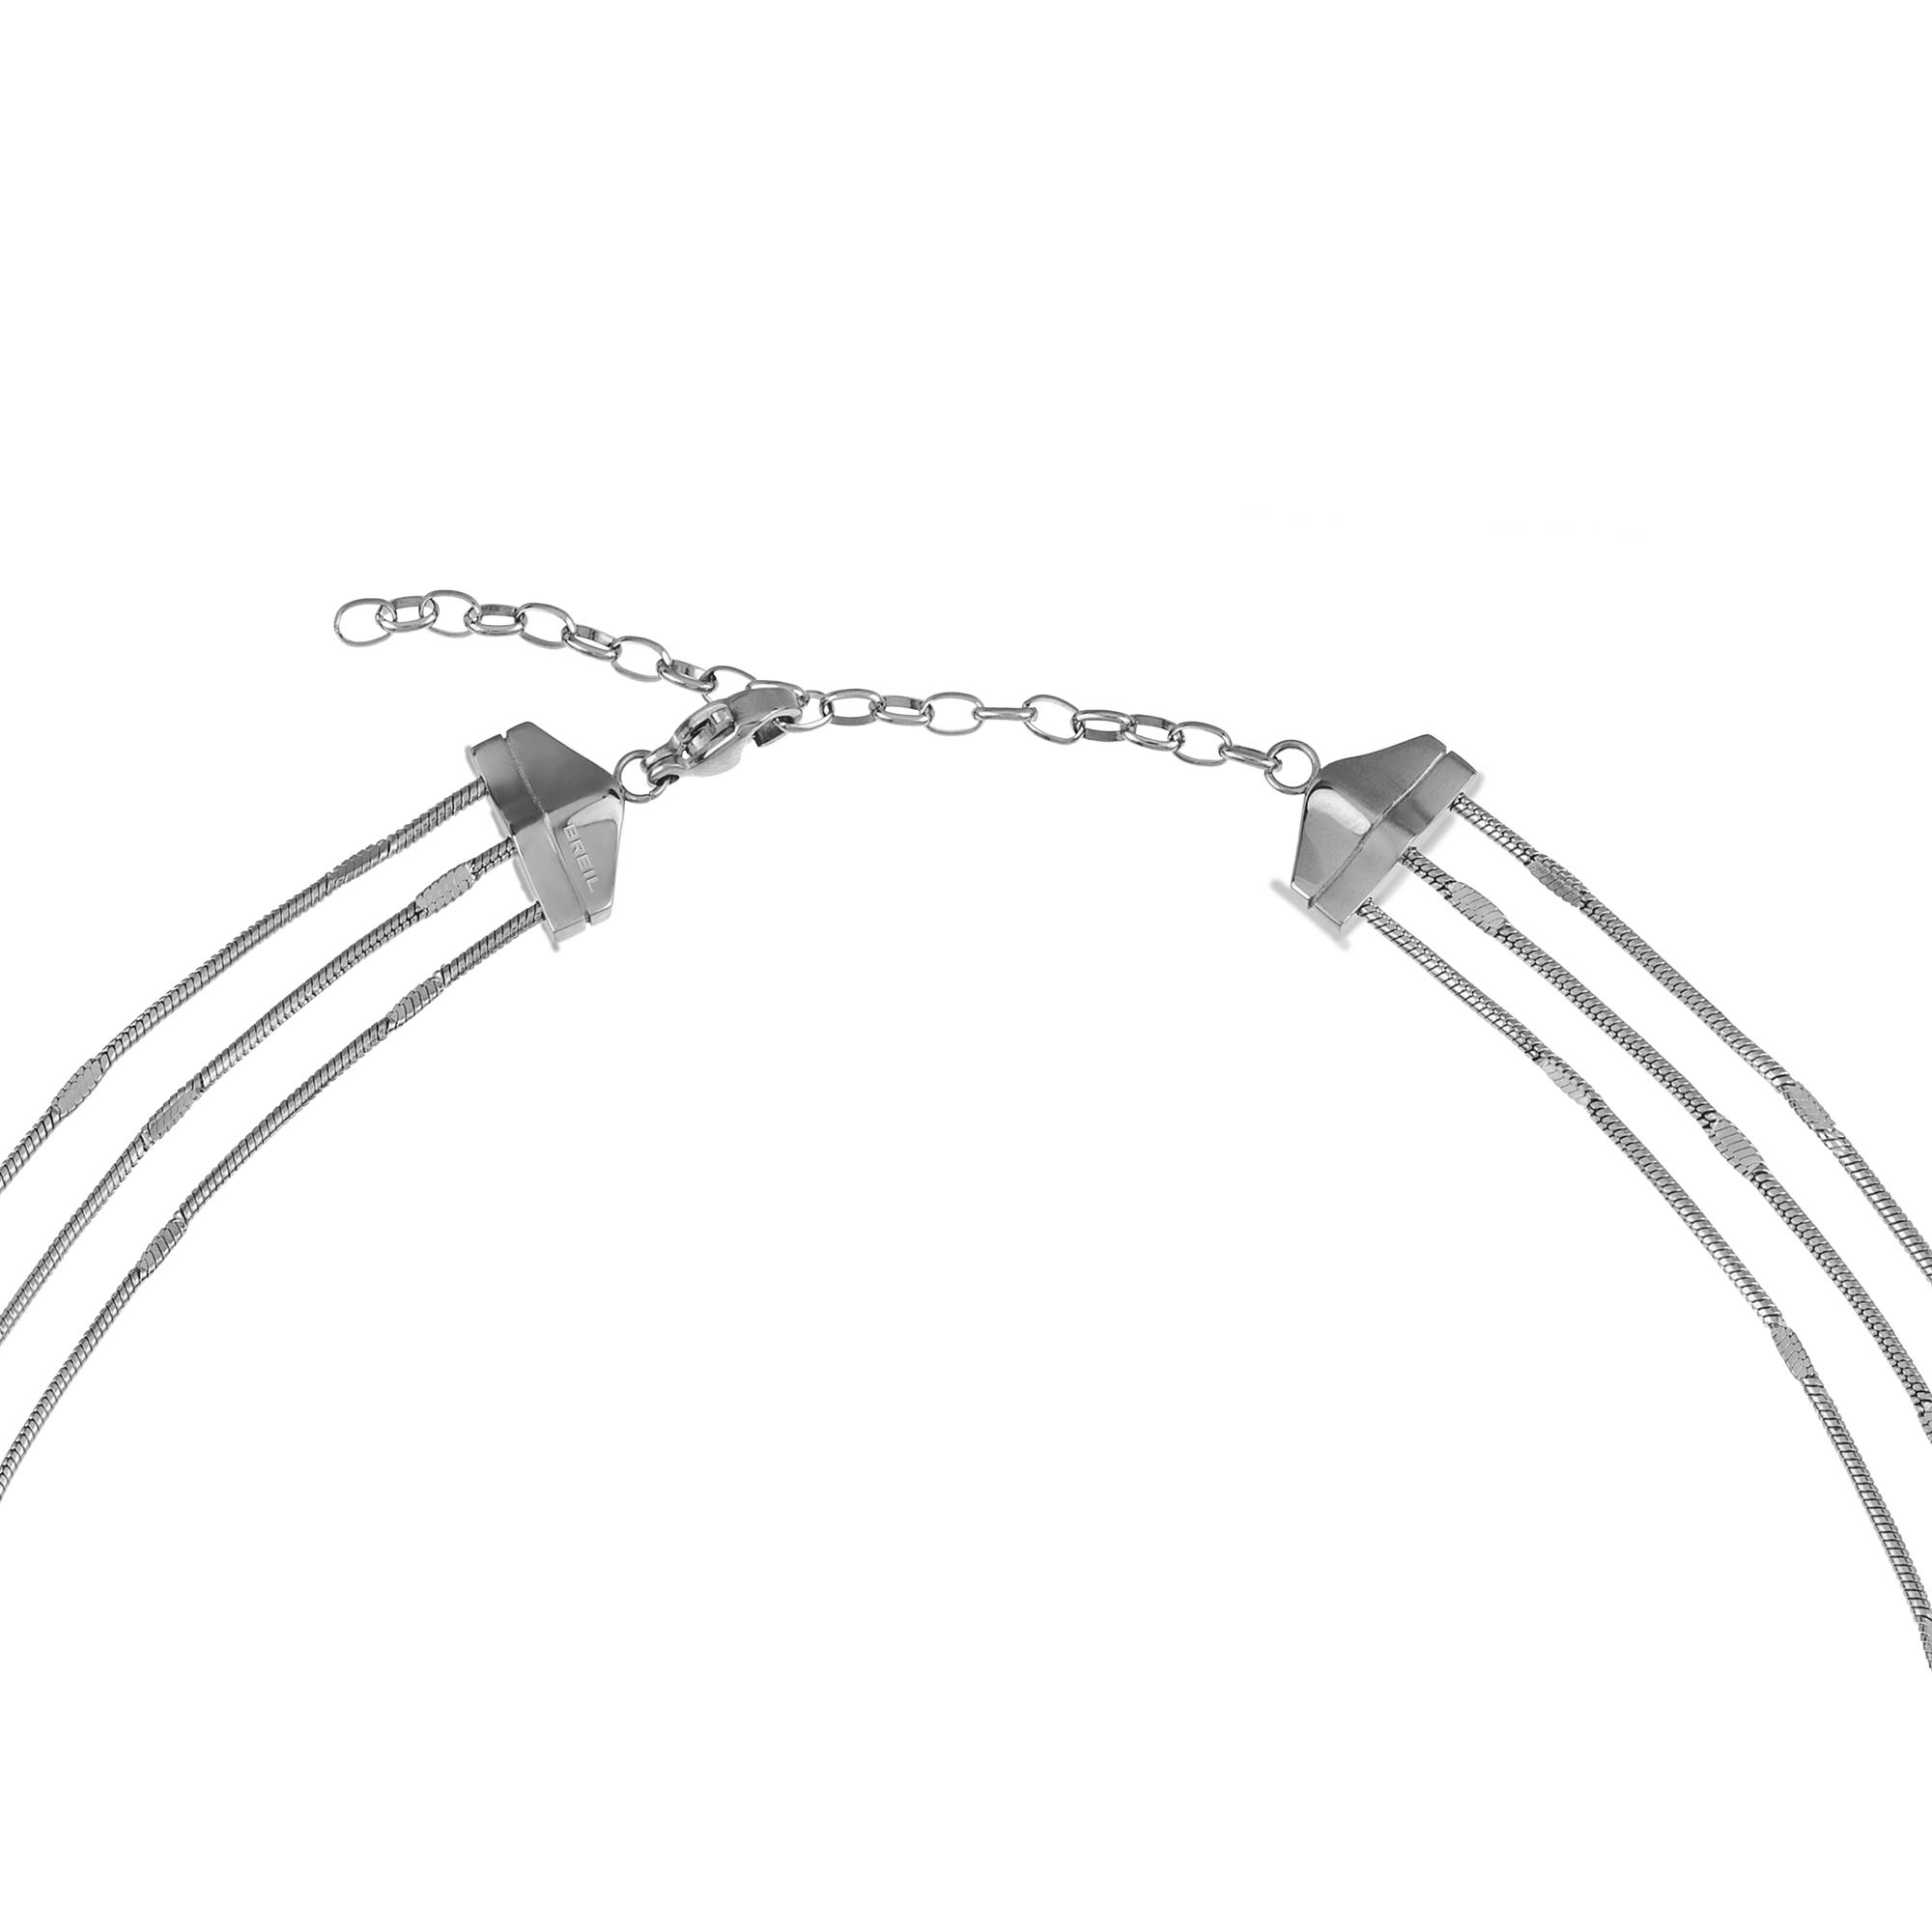 SINUOUS - STAINLESS STEEL NECKLACE - 2 - TJ3094 | Breil